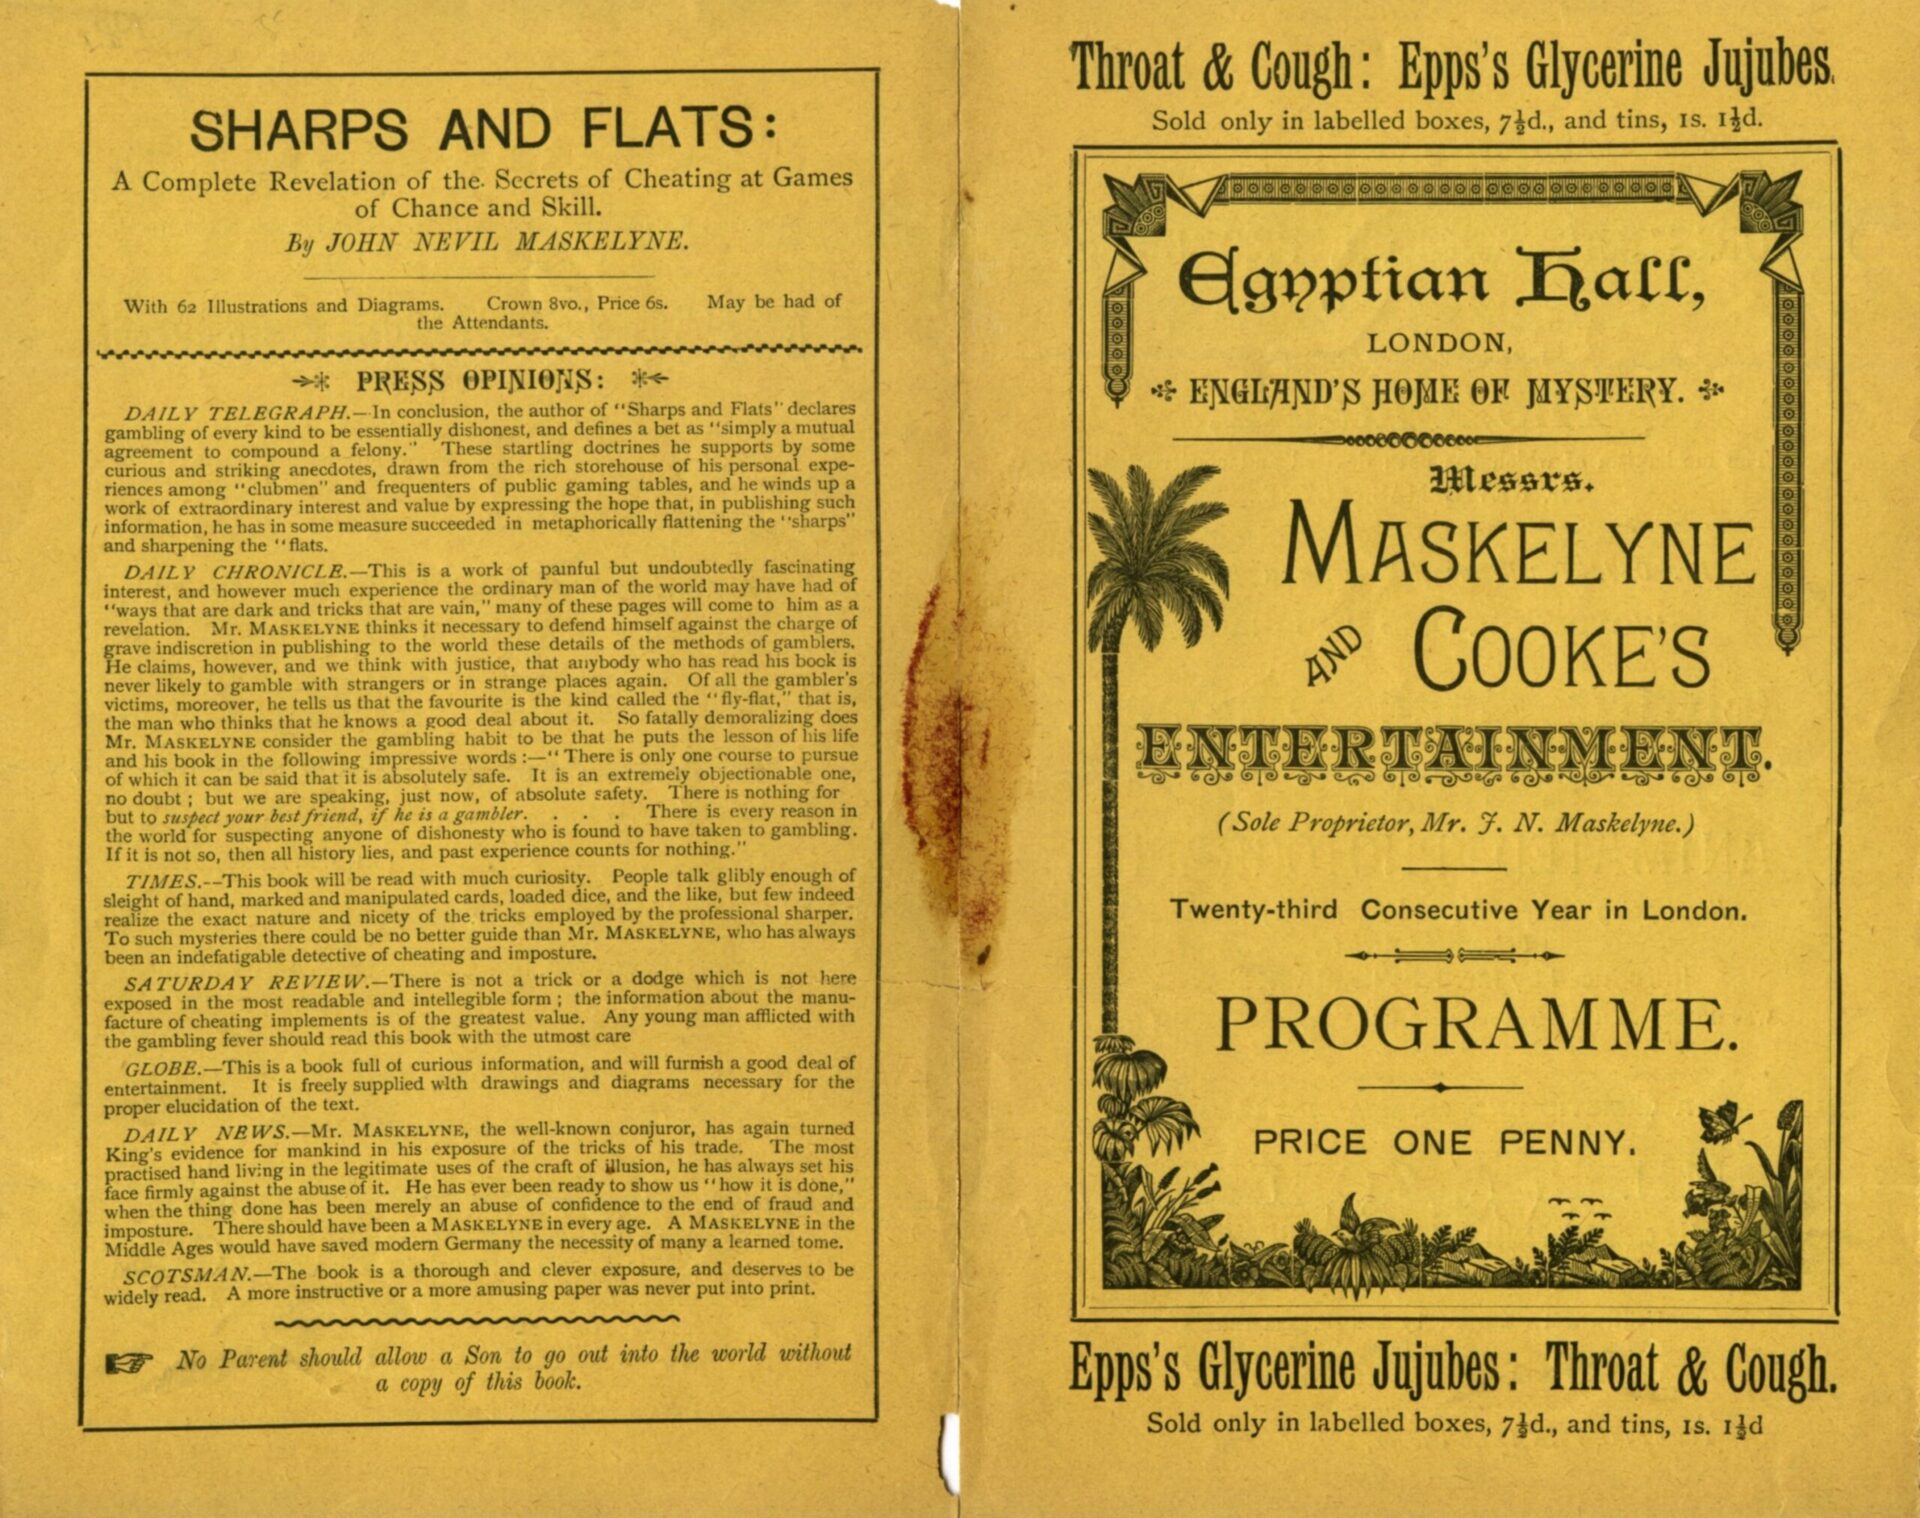 Maskelyne and Cooke programme for the Egyptian Hall, 23rd consecutive year